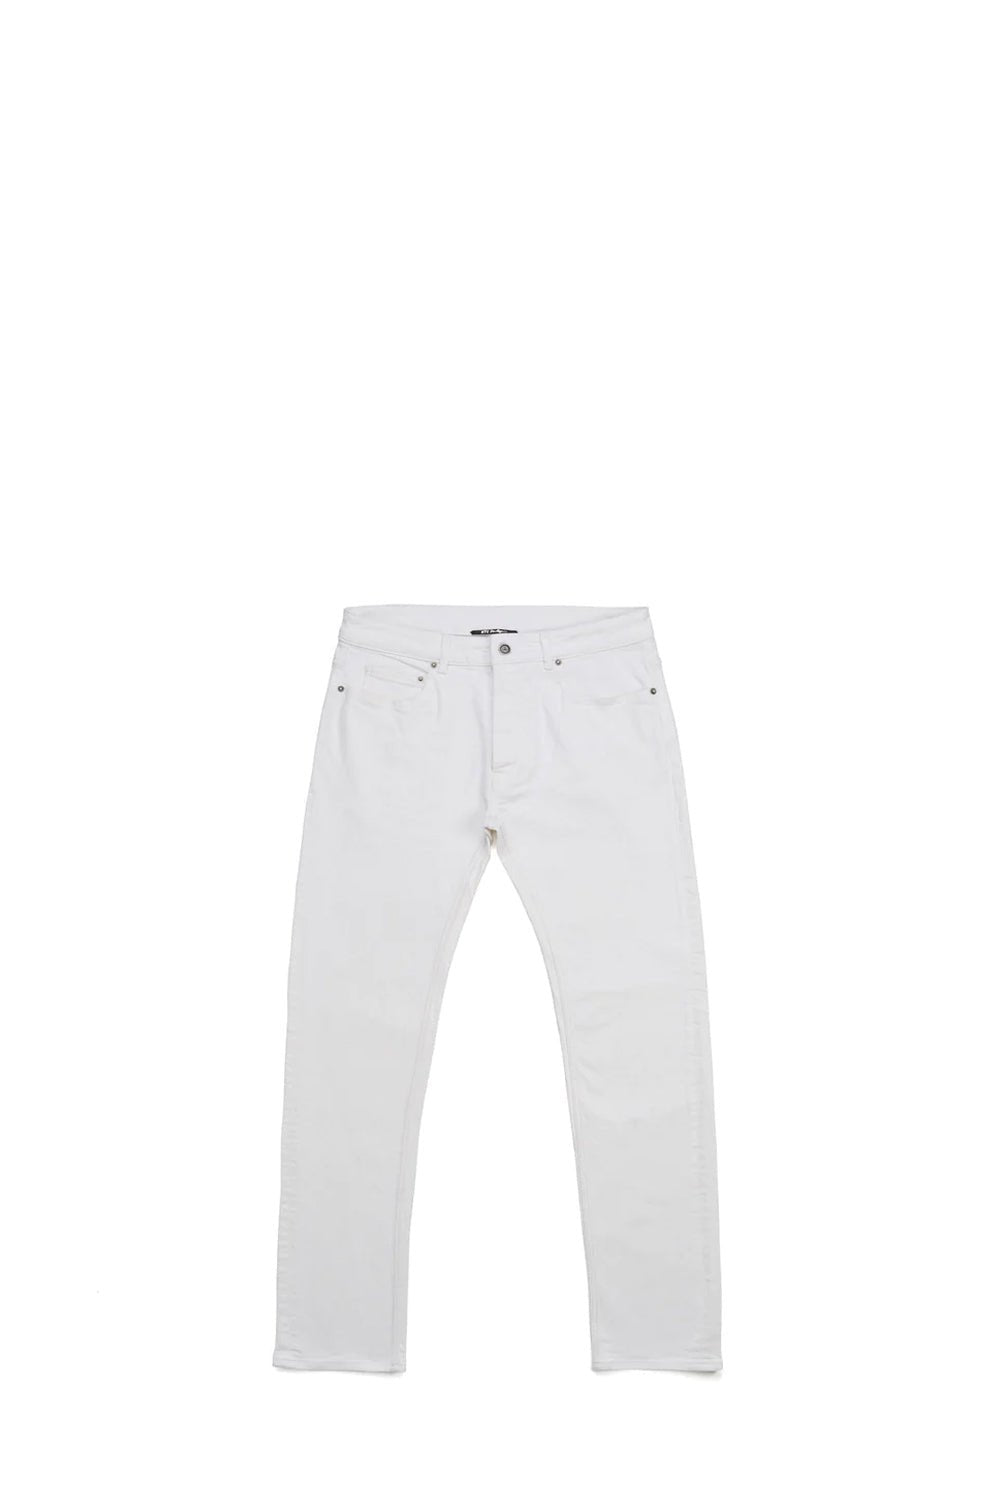 SLIM BASIC WHITE Slim fit jeans in white denim, 5 pockets, hidden front button closure. Metallic logo detail on the back. 100% cotton. Made in Italy. HTC LOS ANGELES